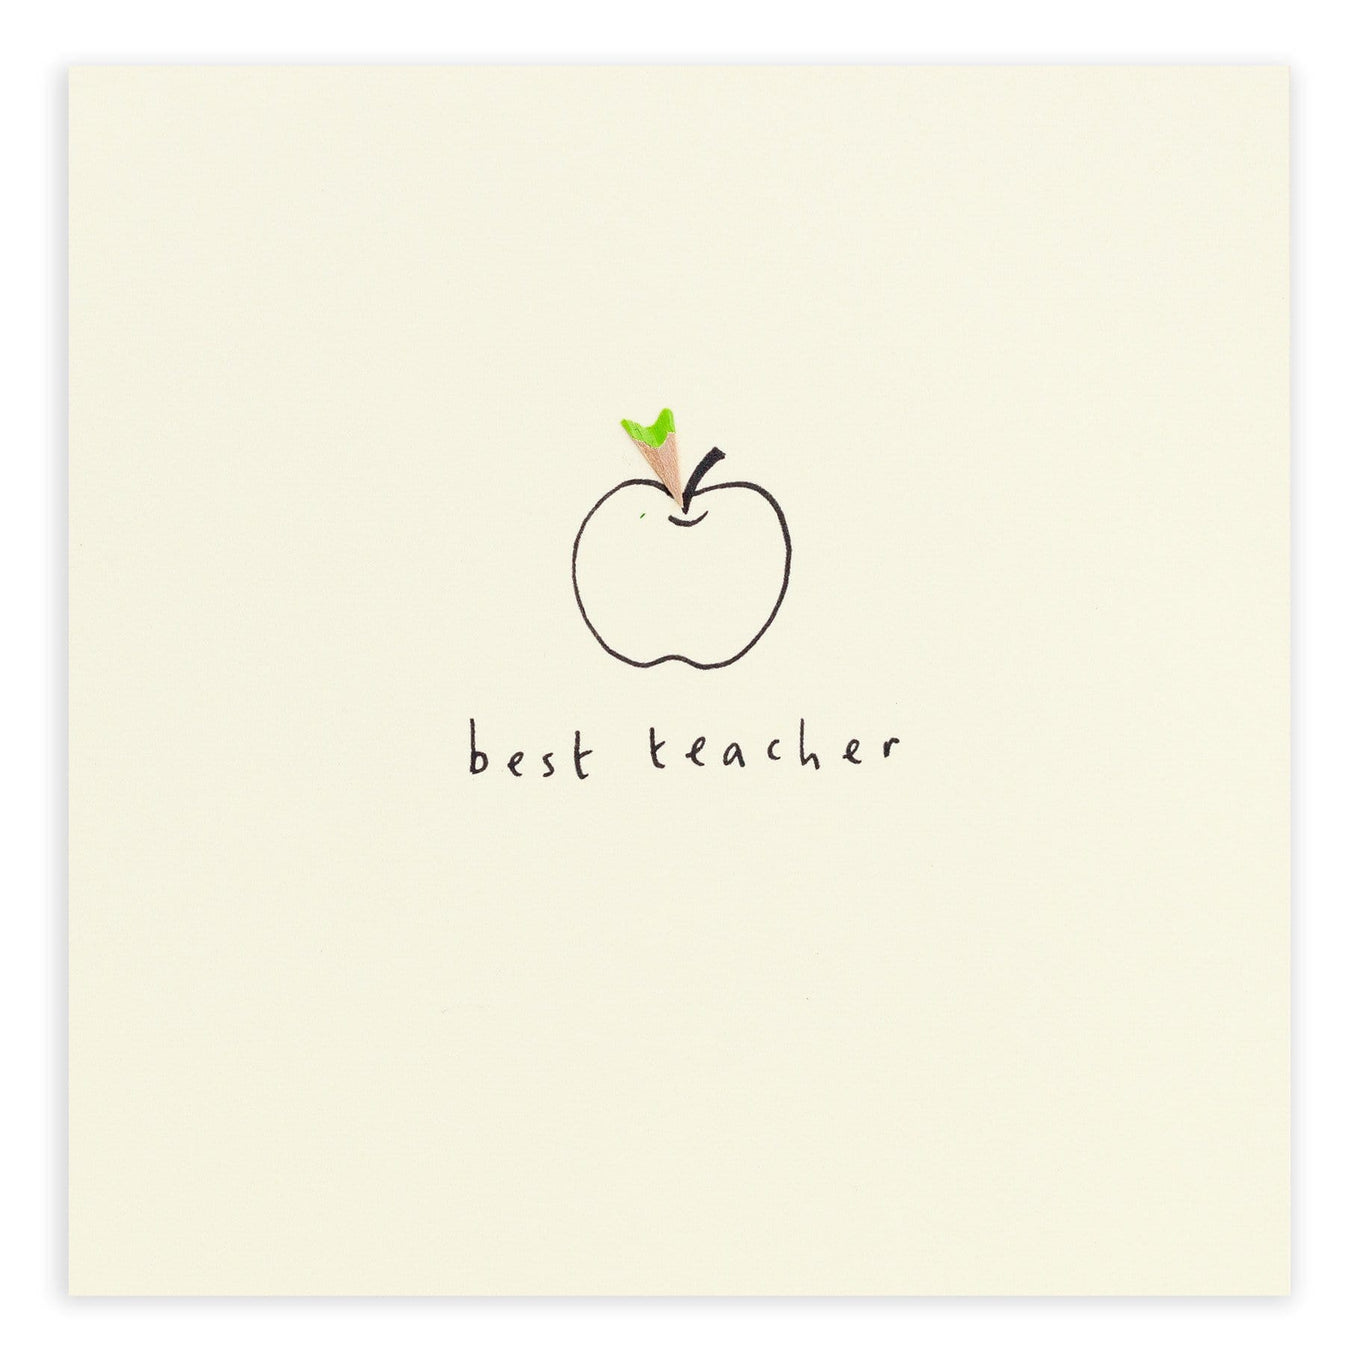 Card of a drawing of an apple with a leaf made of a bright green pencil shaving. Card reads, "best teacher."